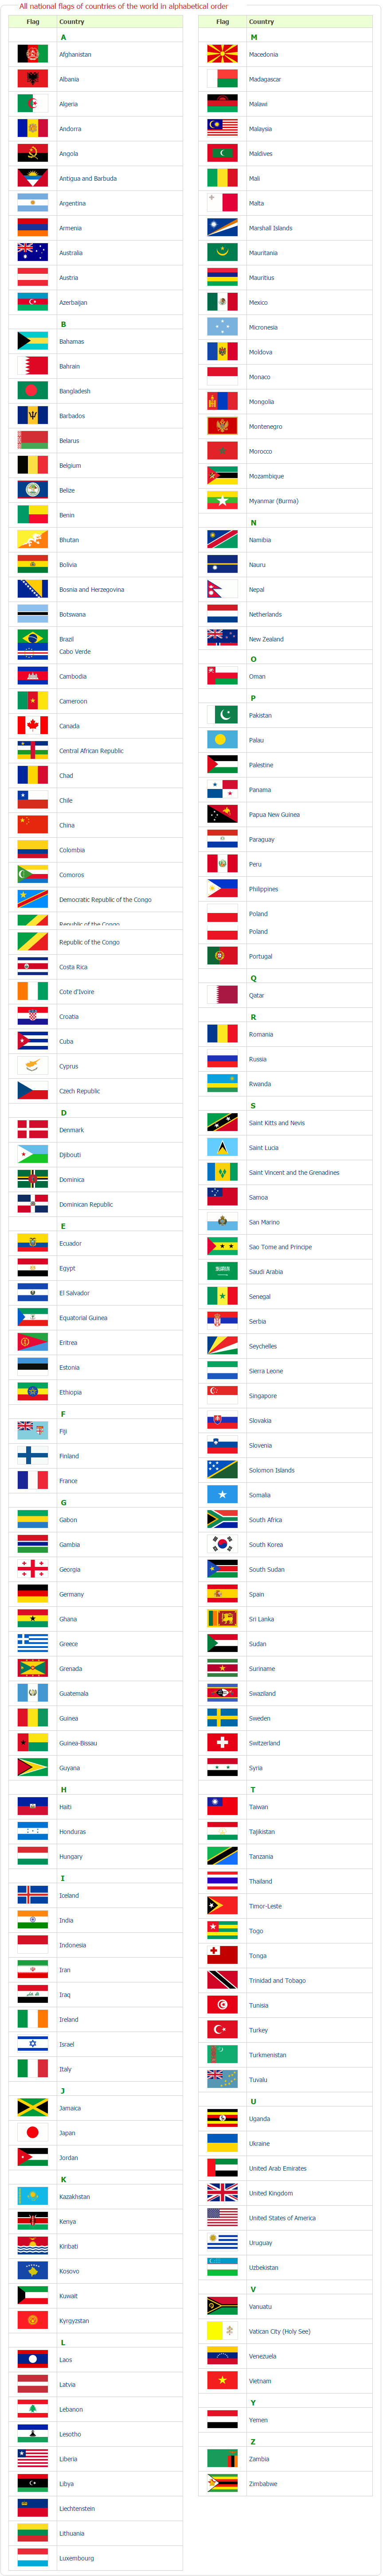 flags-of-the-world-online-dictionary-for-kids